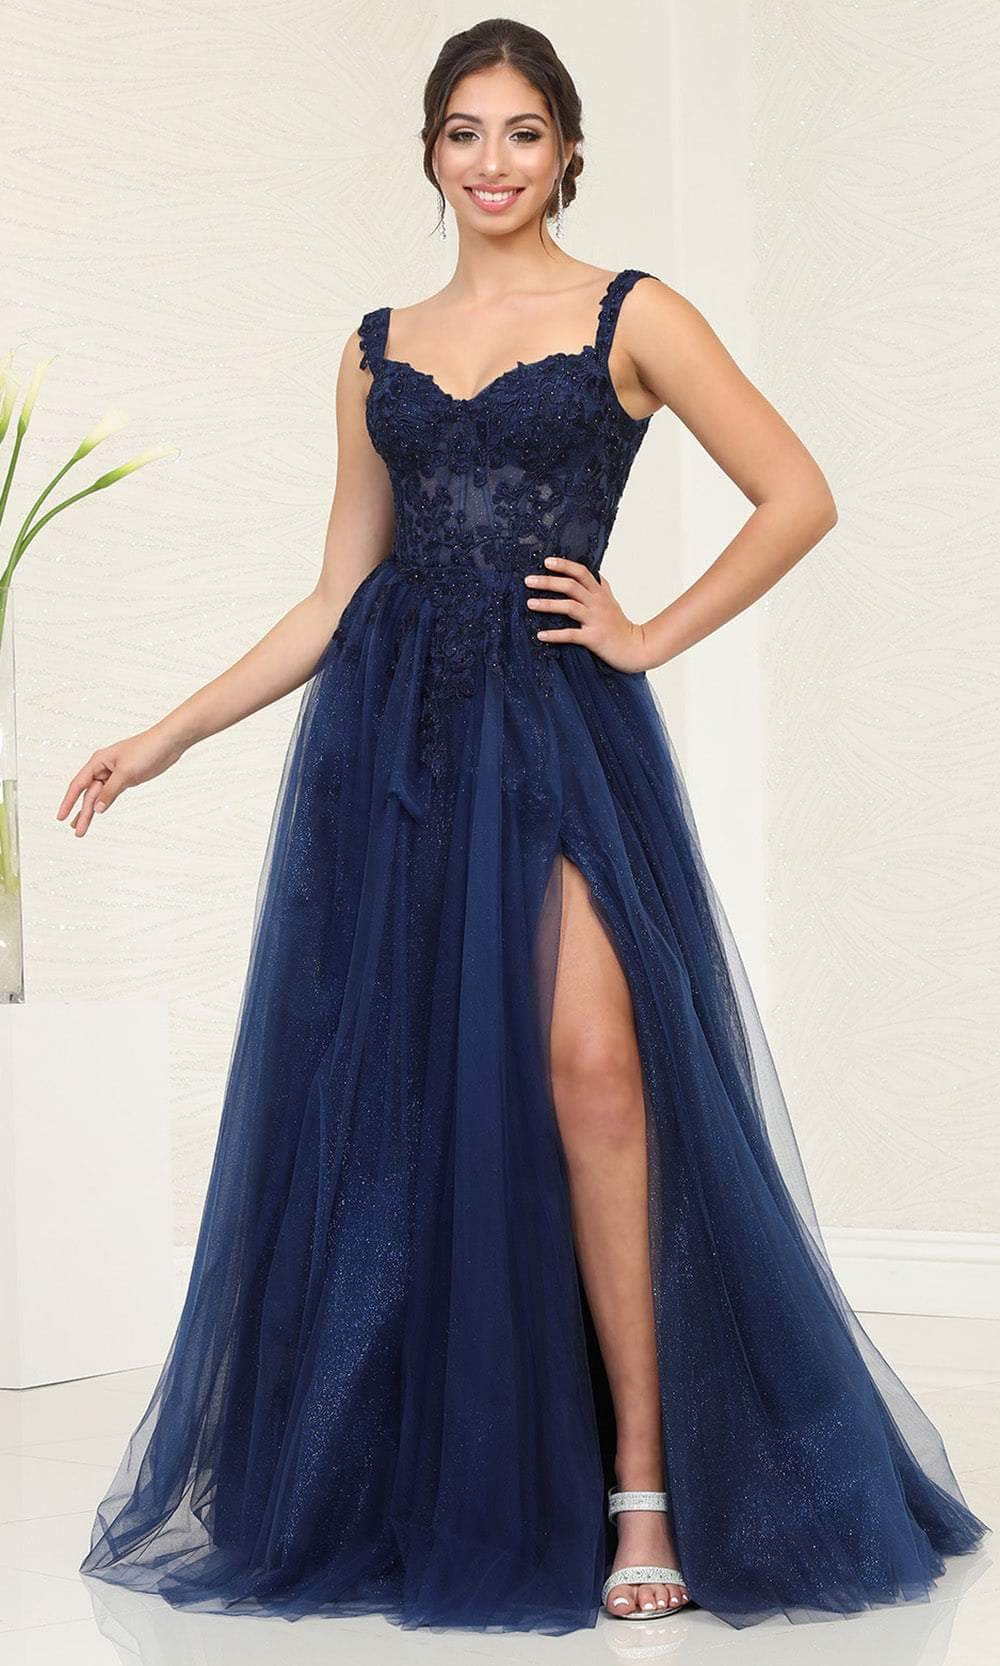 May Queen MQ2053 - Sweetheart Embellished Prom Gown Prom Dresses